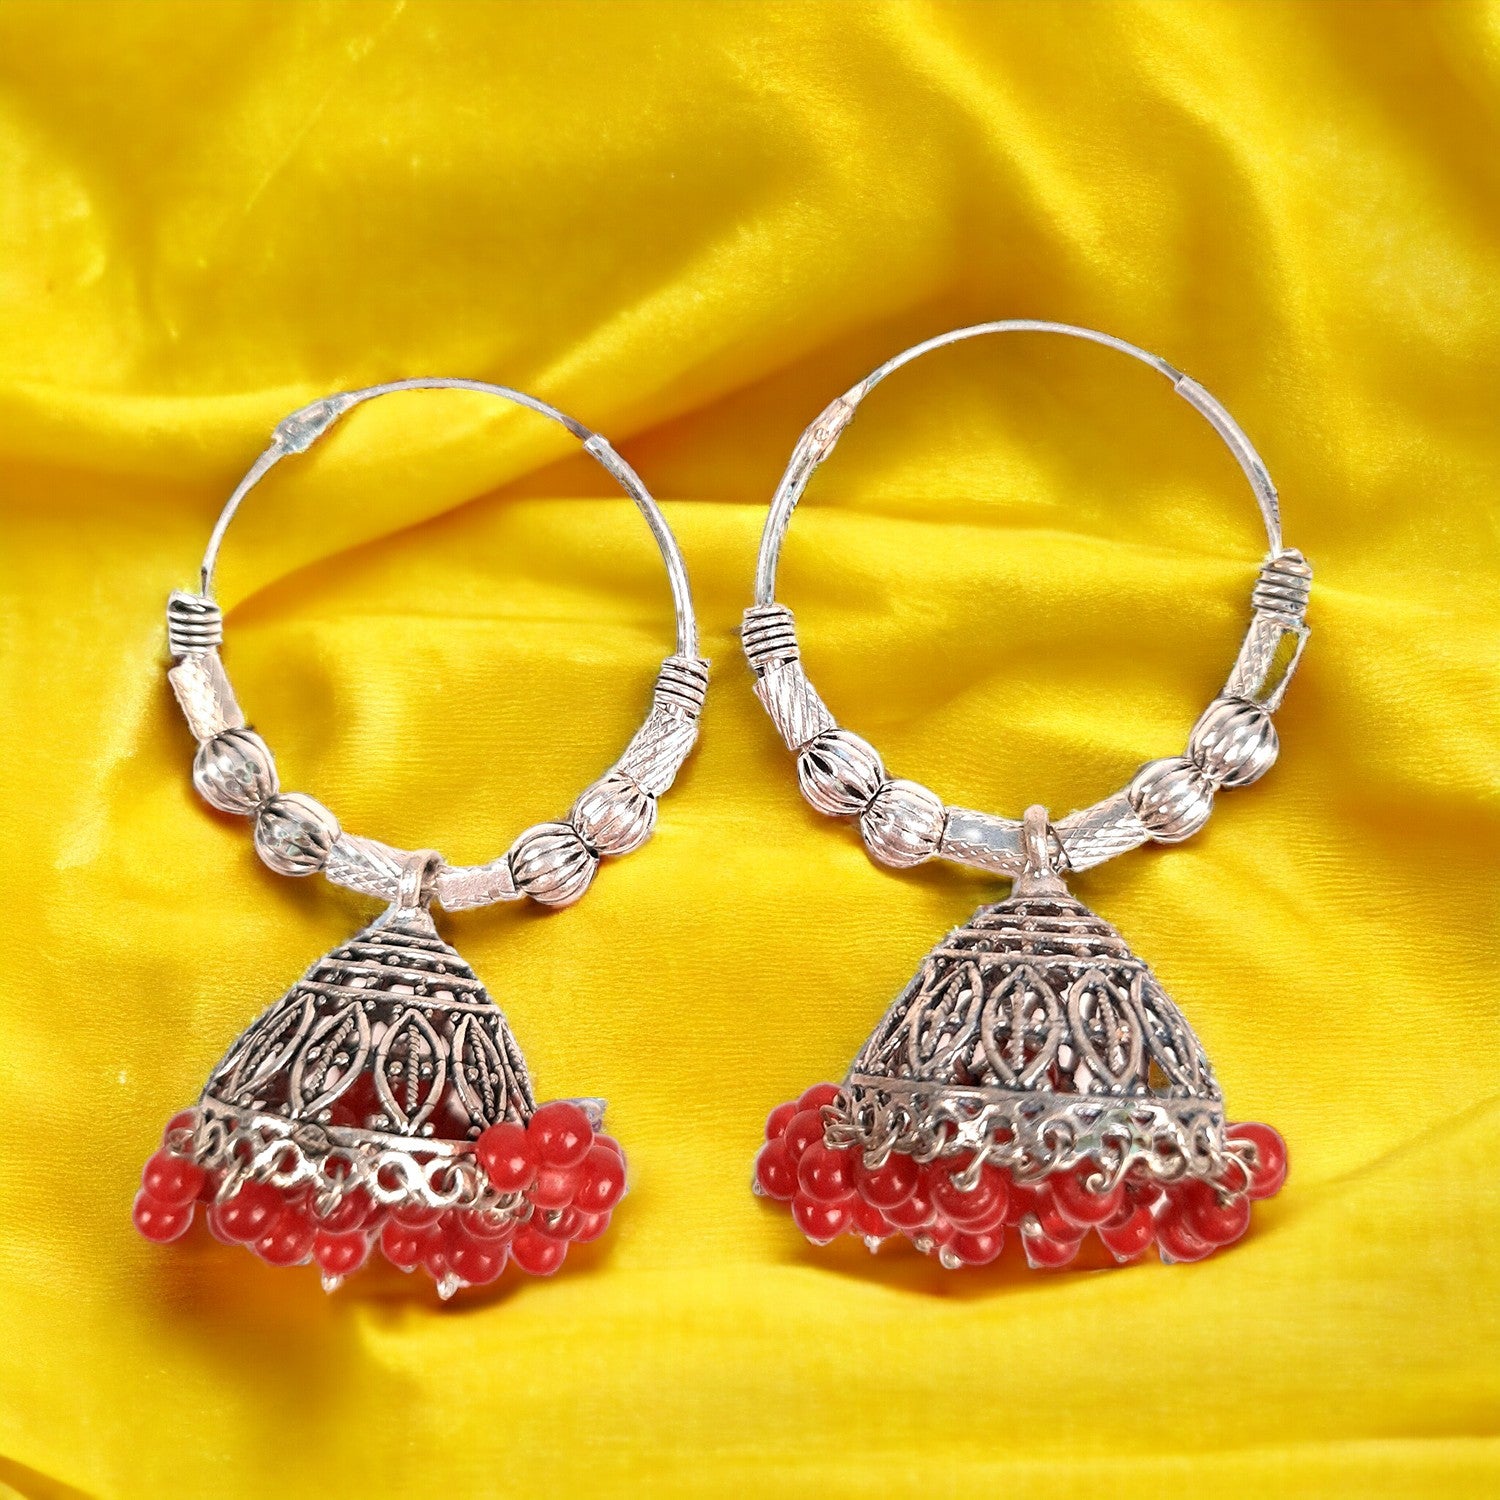 Earrings for Girls and Women - Jhumka | Oxidised Jewelry | Latest Stylish Fashion Jewellery | Gift for Her - Apkamart